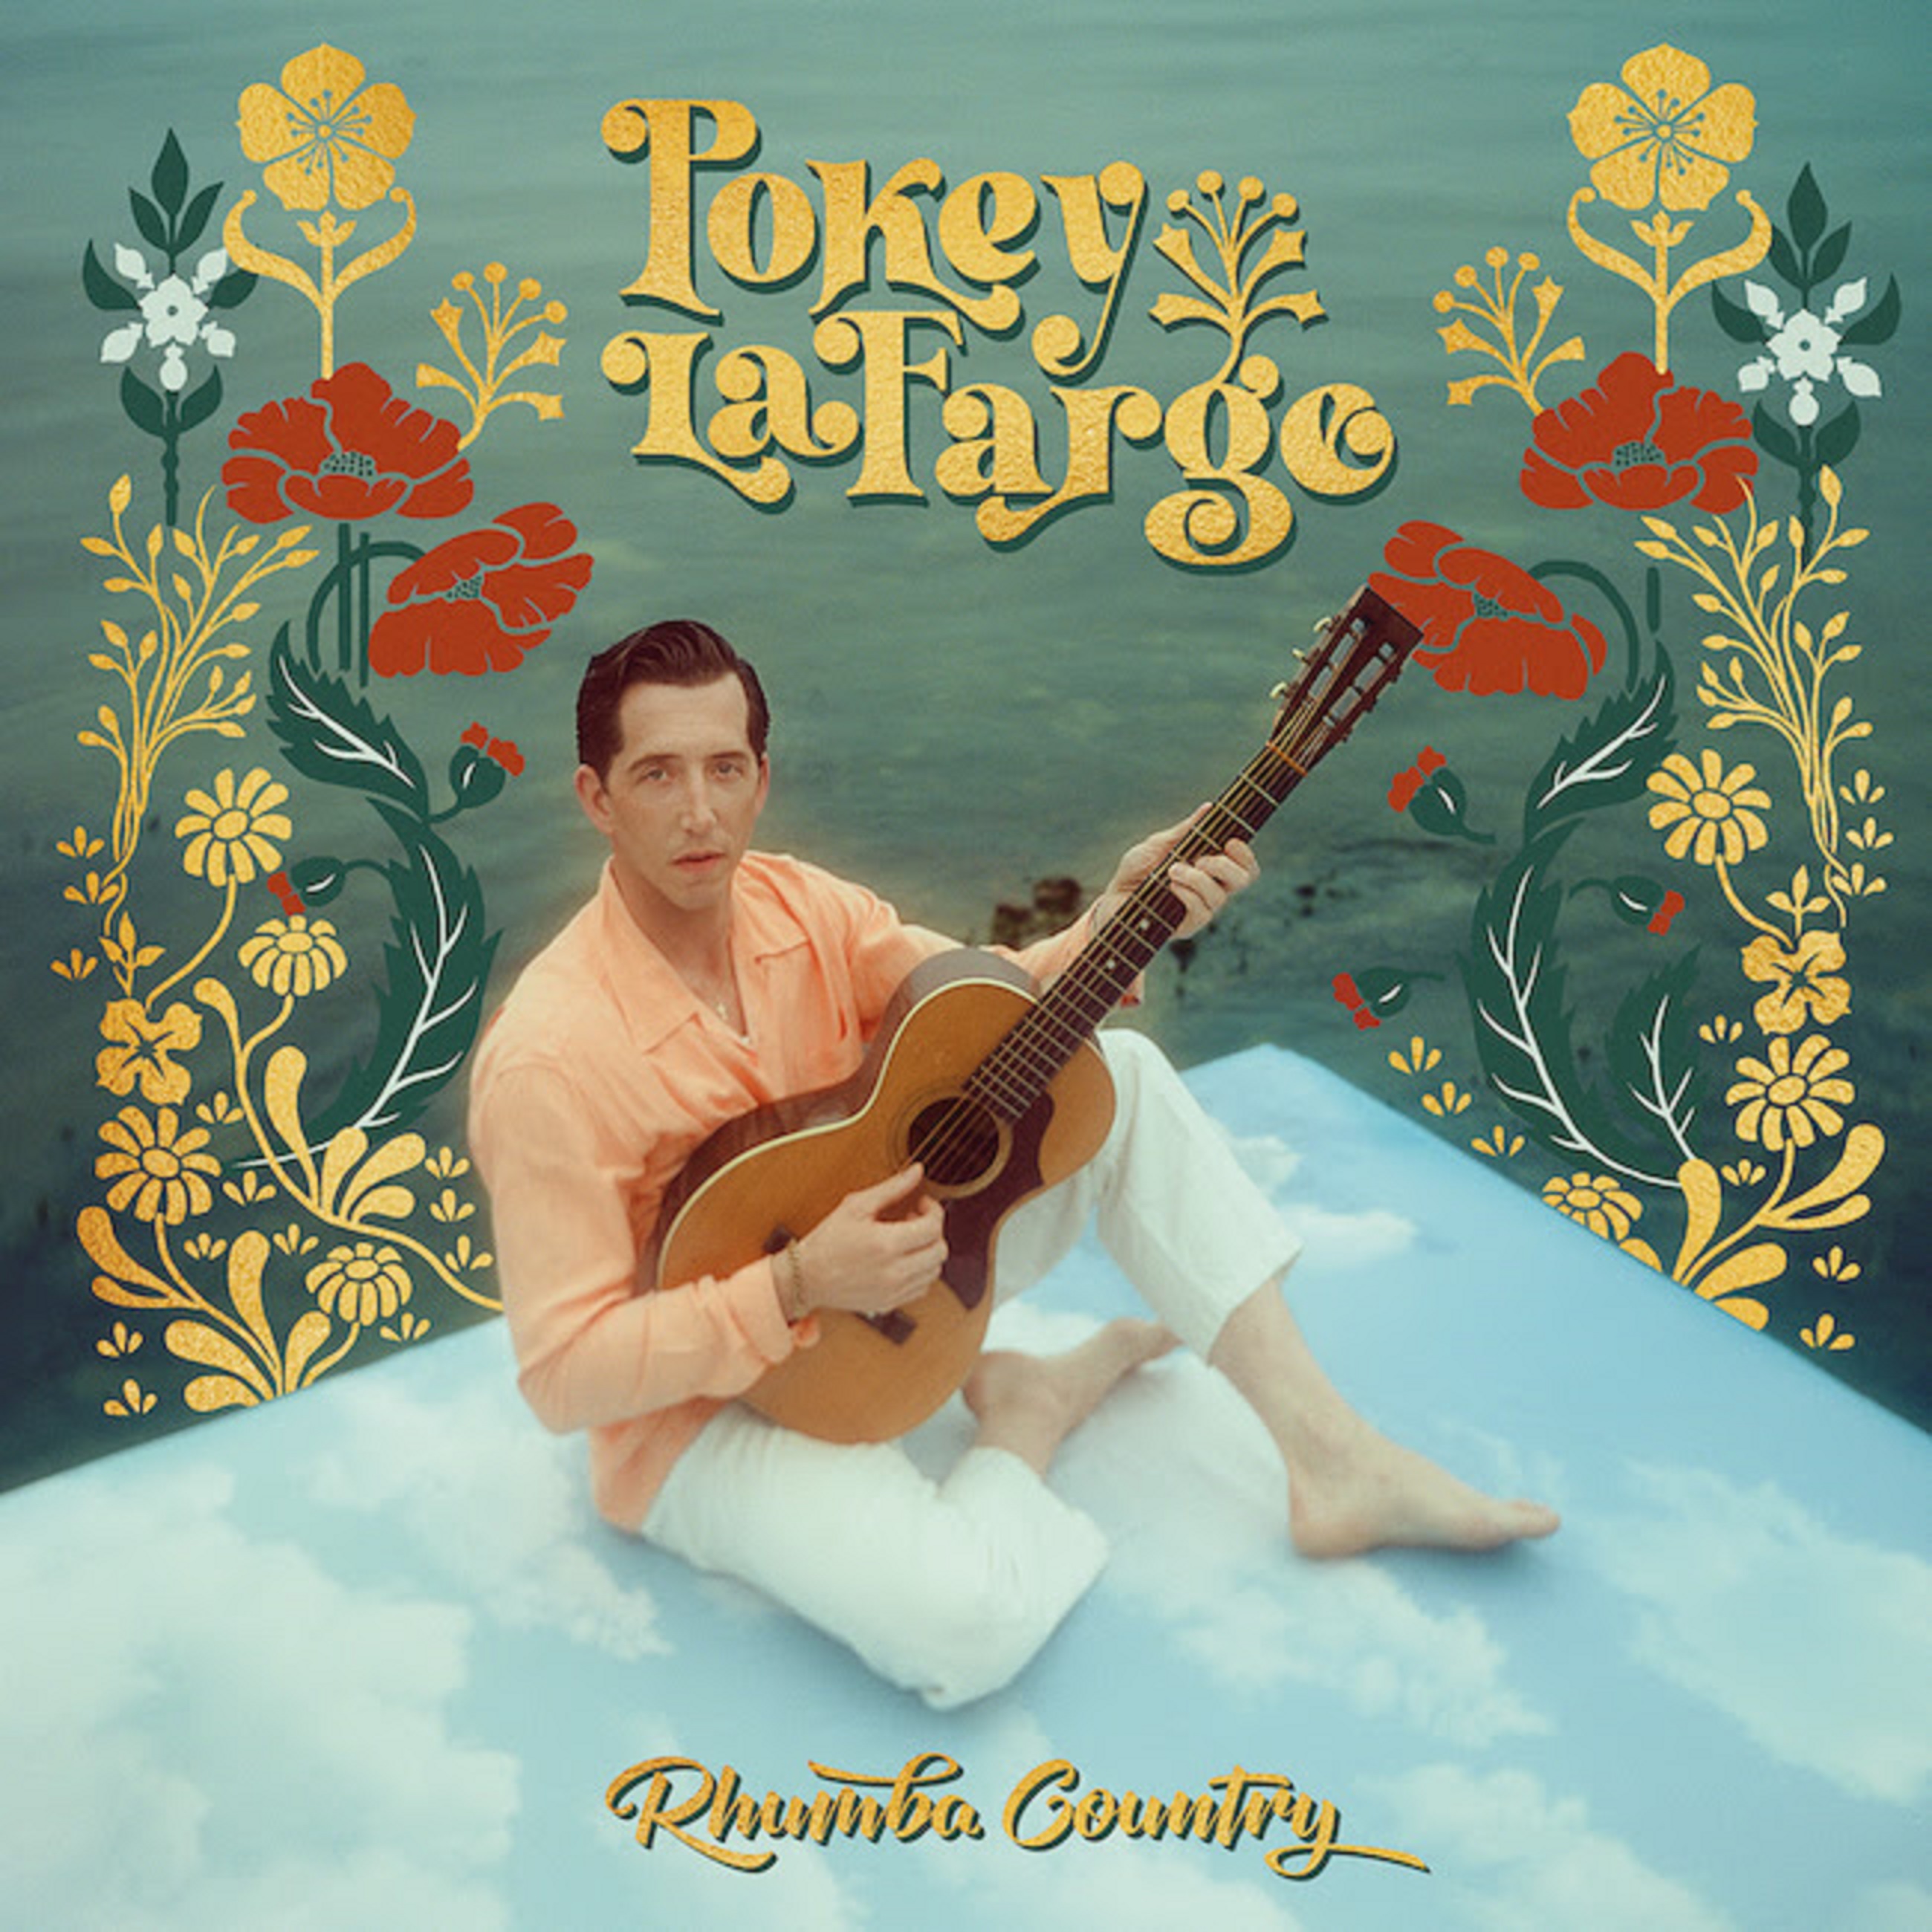 Pokey LaFarge To Release "Rhumba Country" May 10 - Releases "So Long Chicago" Video Today